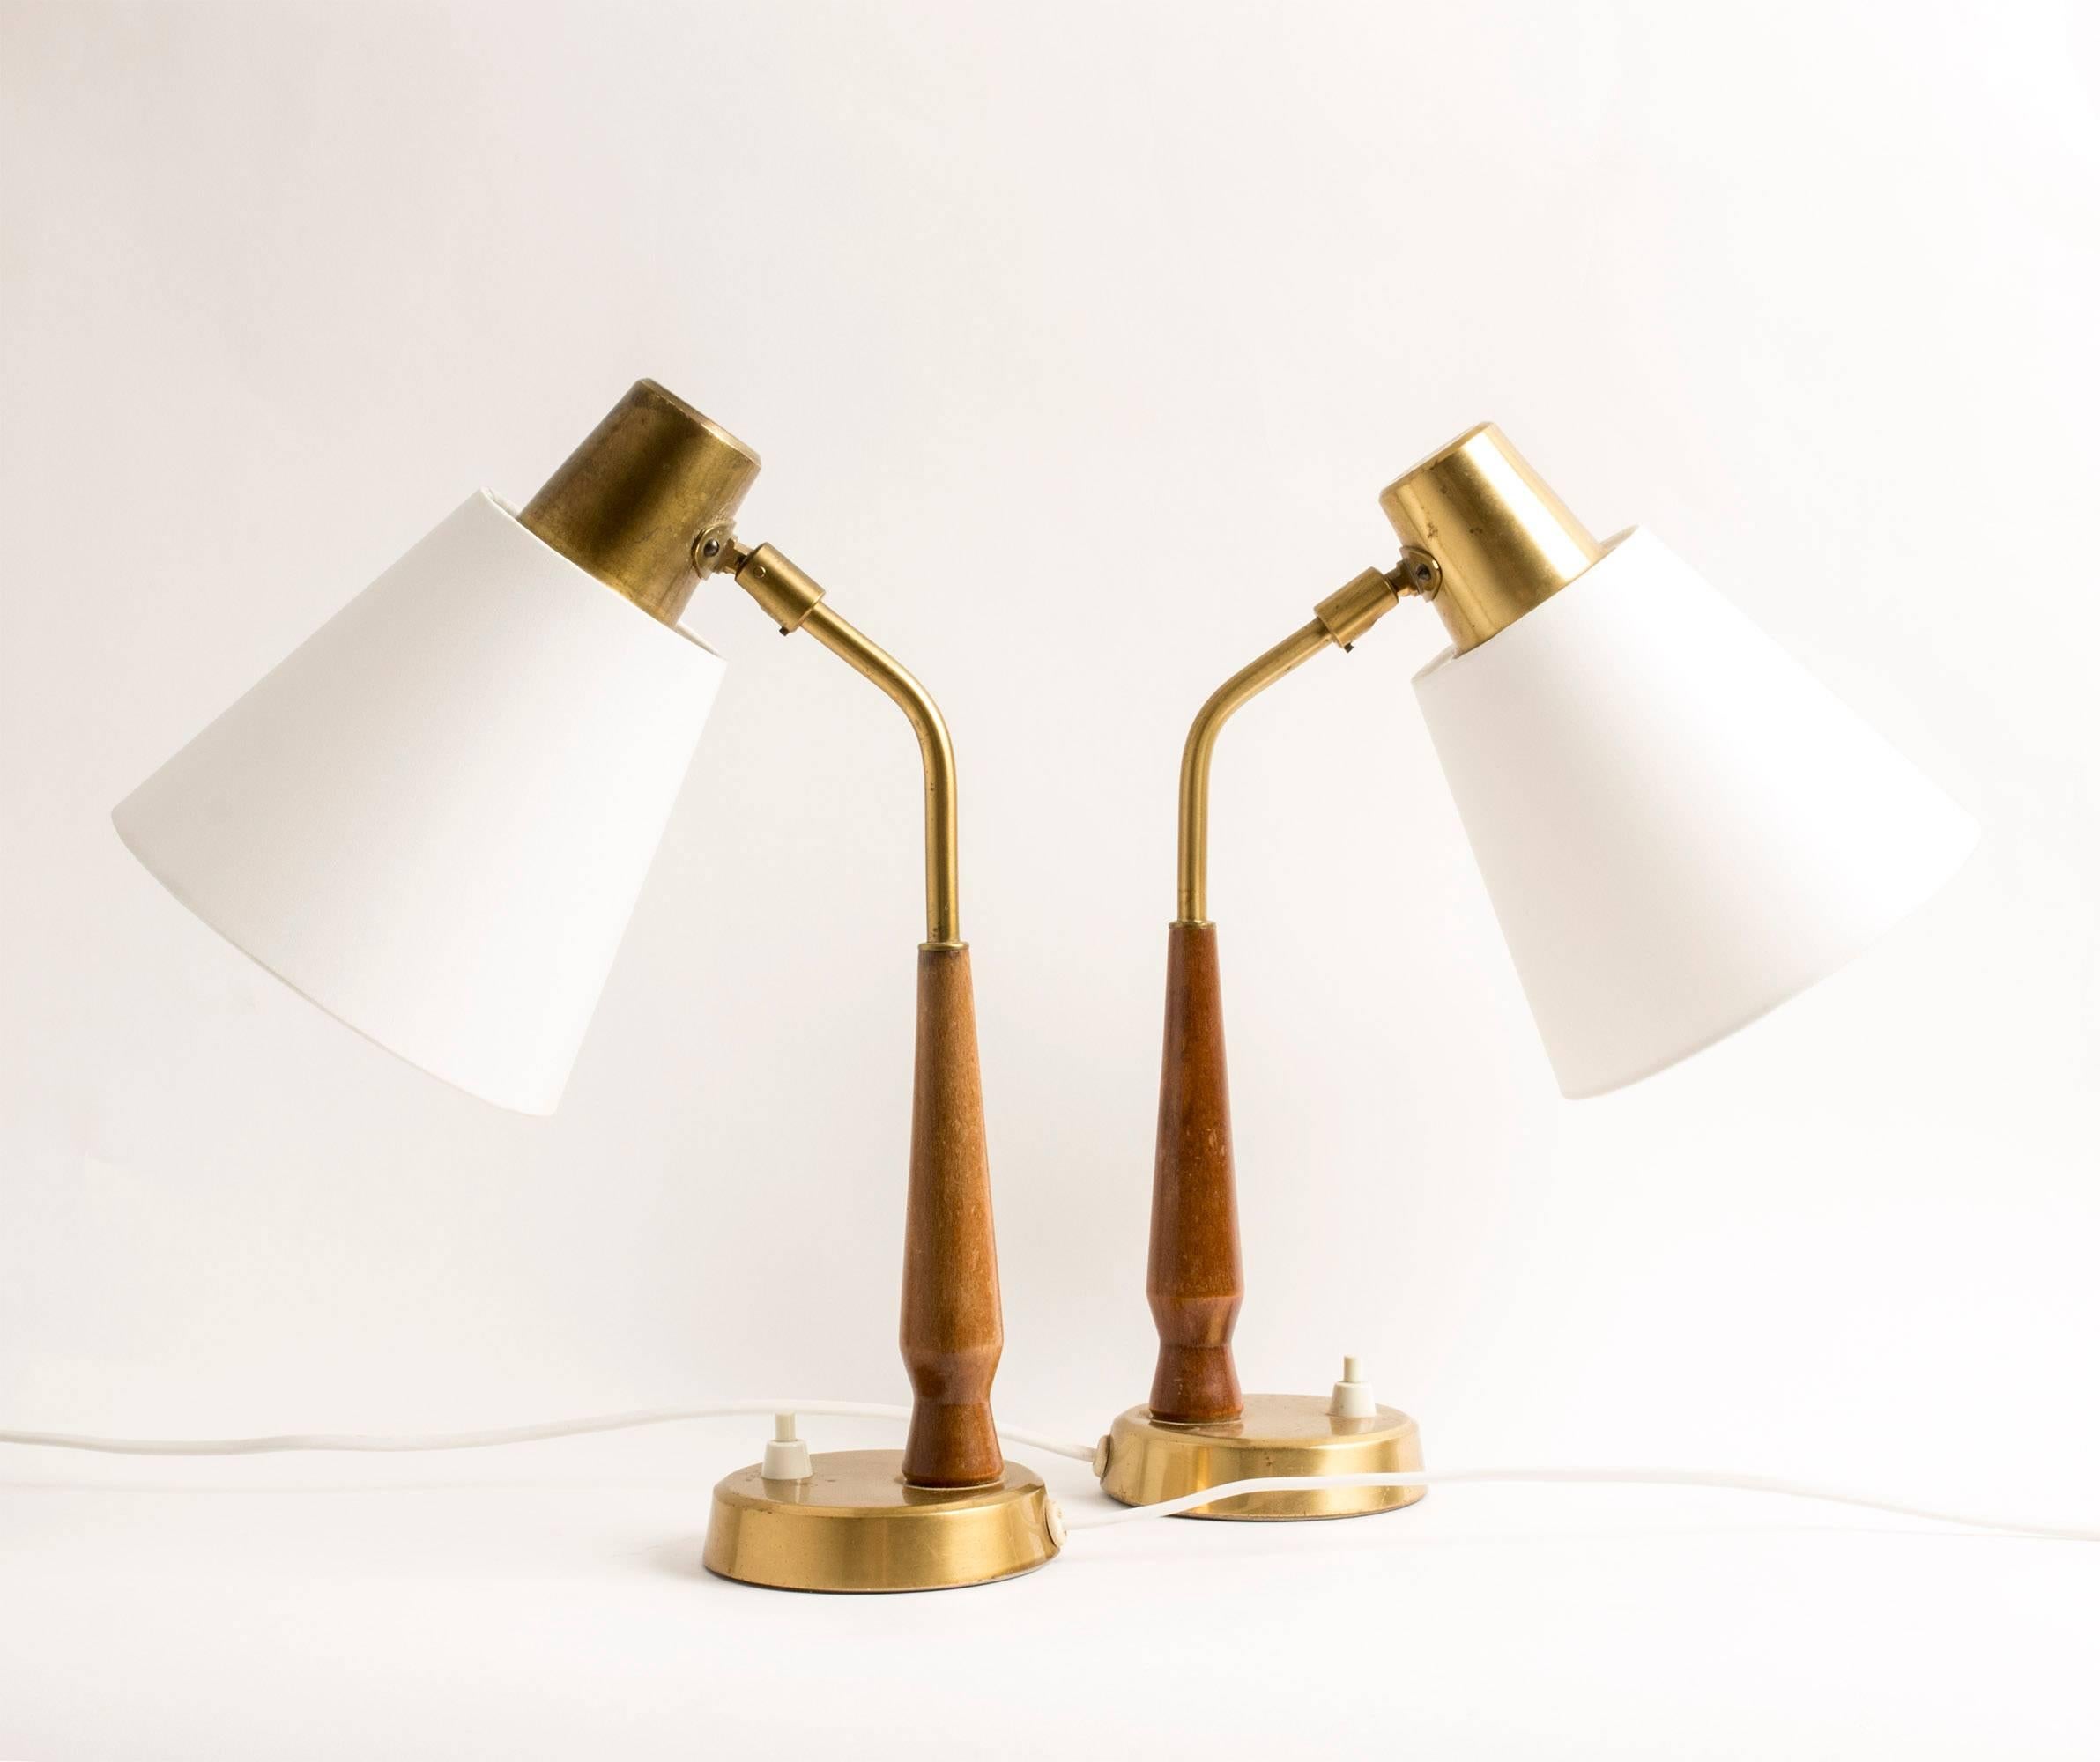 Pair of elegant, small desk or bedside lamps by Hans Bergström, made from brass with teak handles.